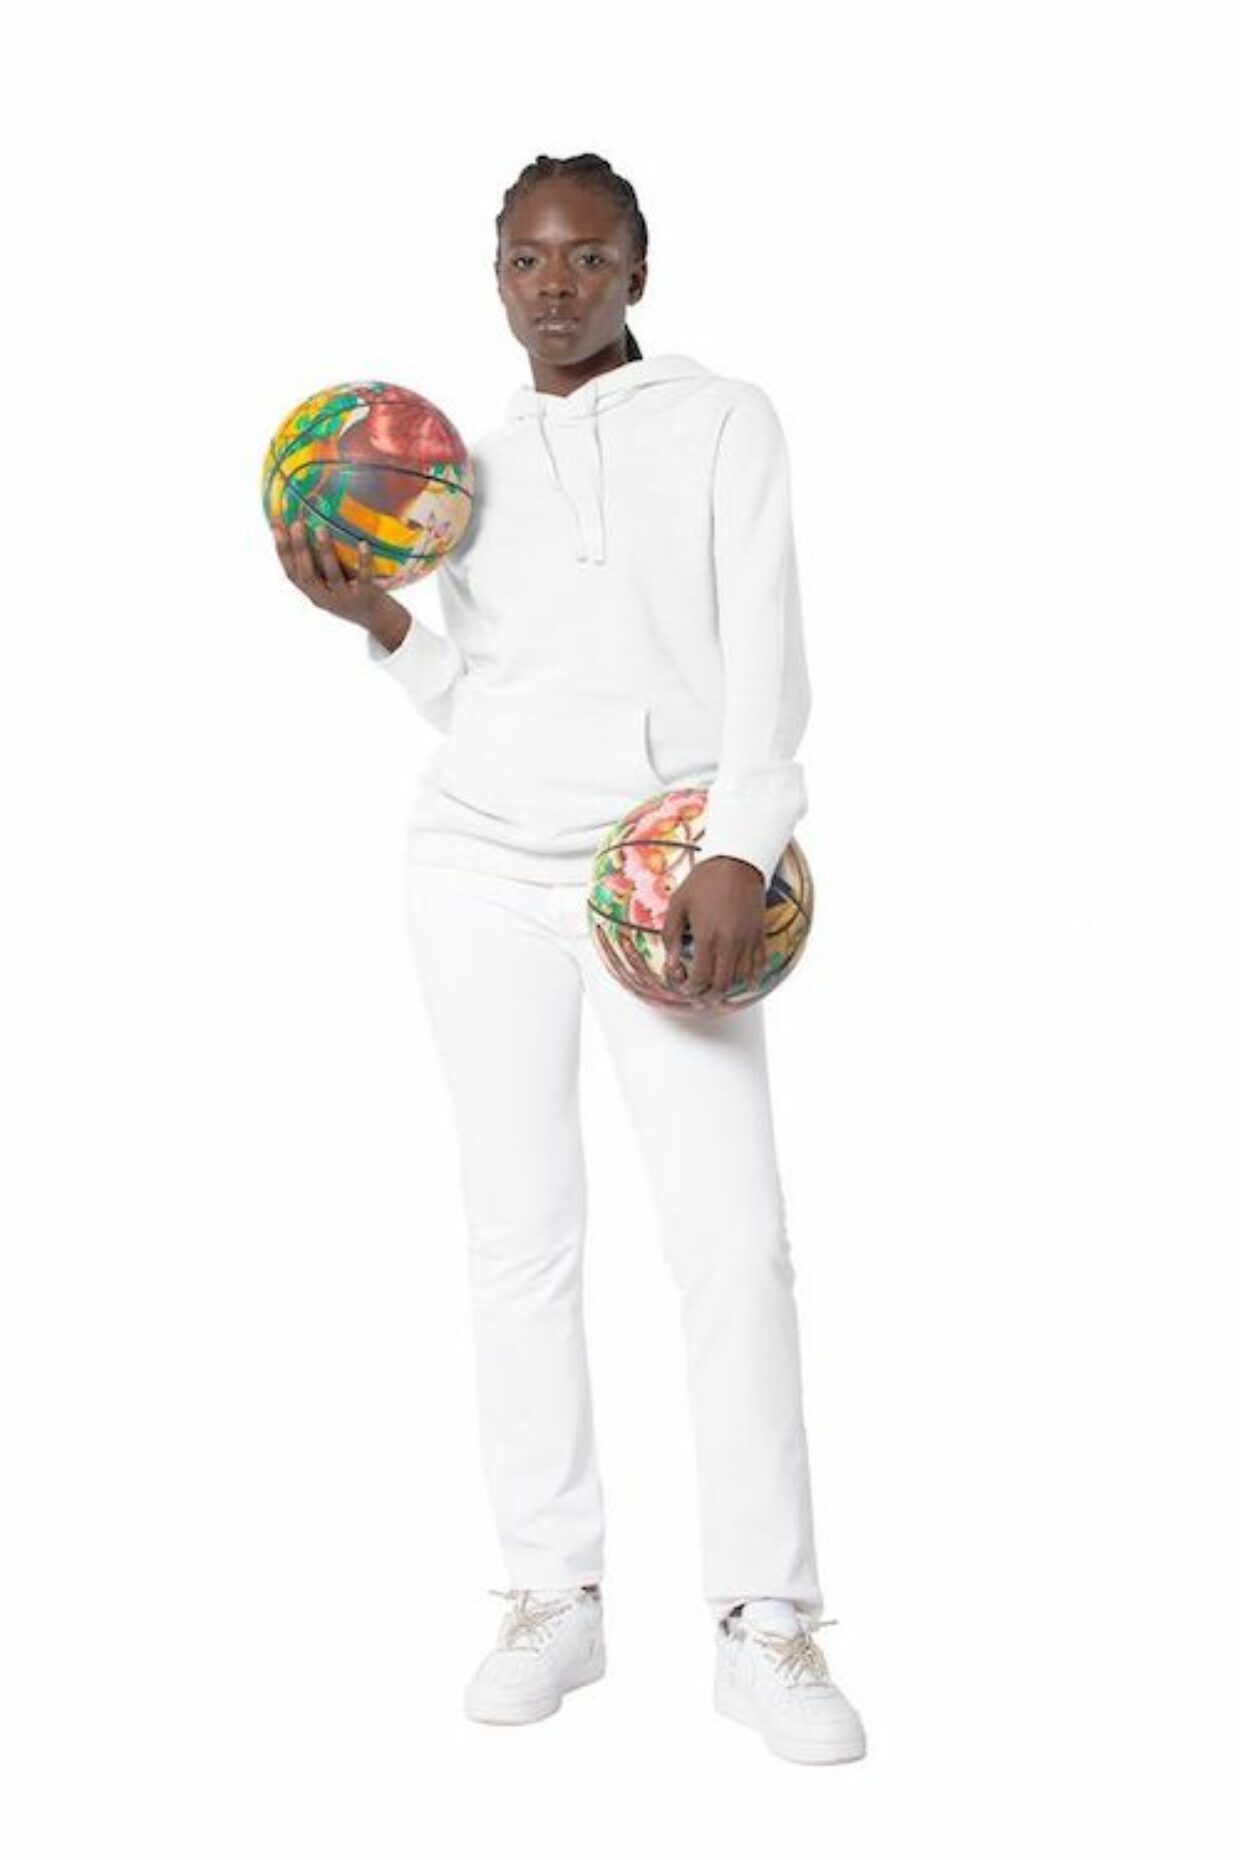 Artist Kehinde Wiley’s New Clothing Collection is a Visual Masterpiece | 4